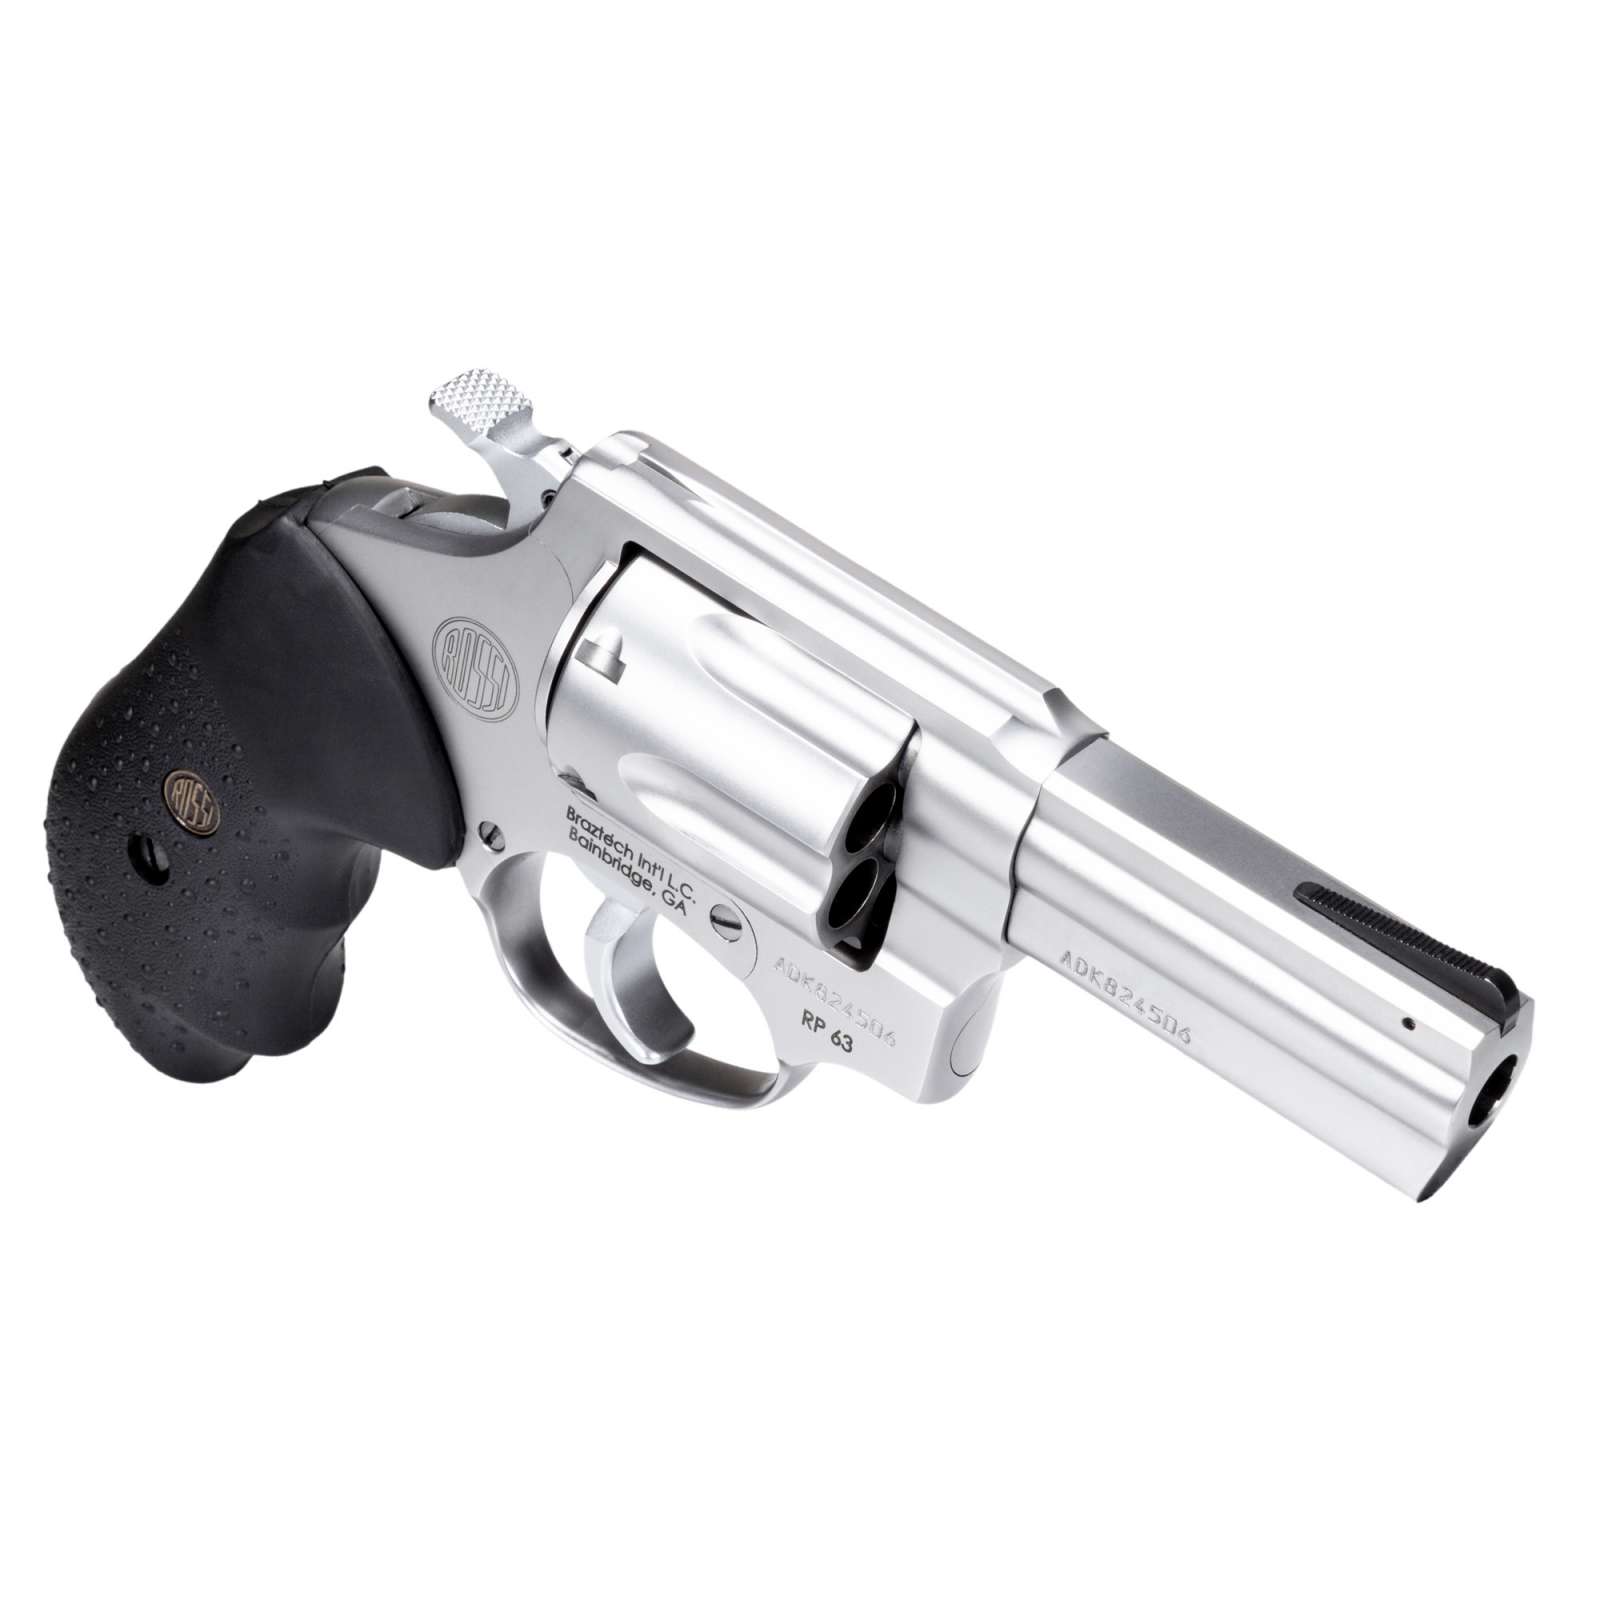 Rossi Rm63 Revolver Stainless 357 Mag 3 Barrel 6rd Rubber Grip Gunzonedeals 9949